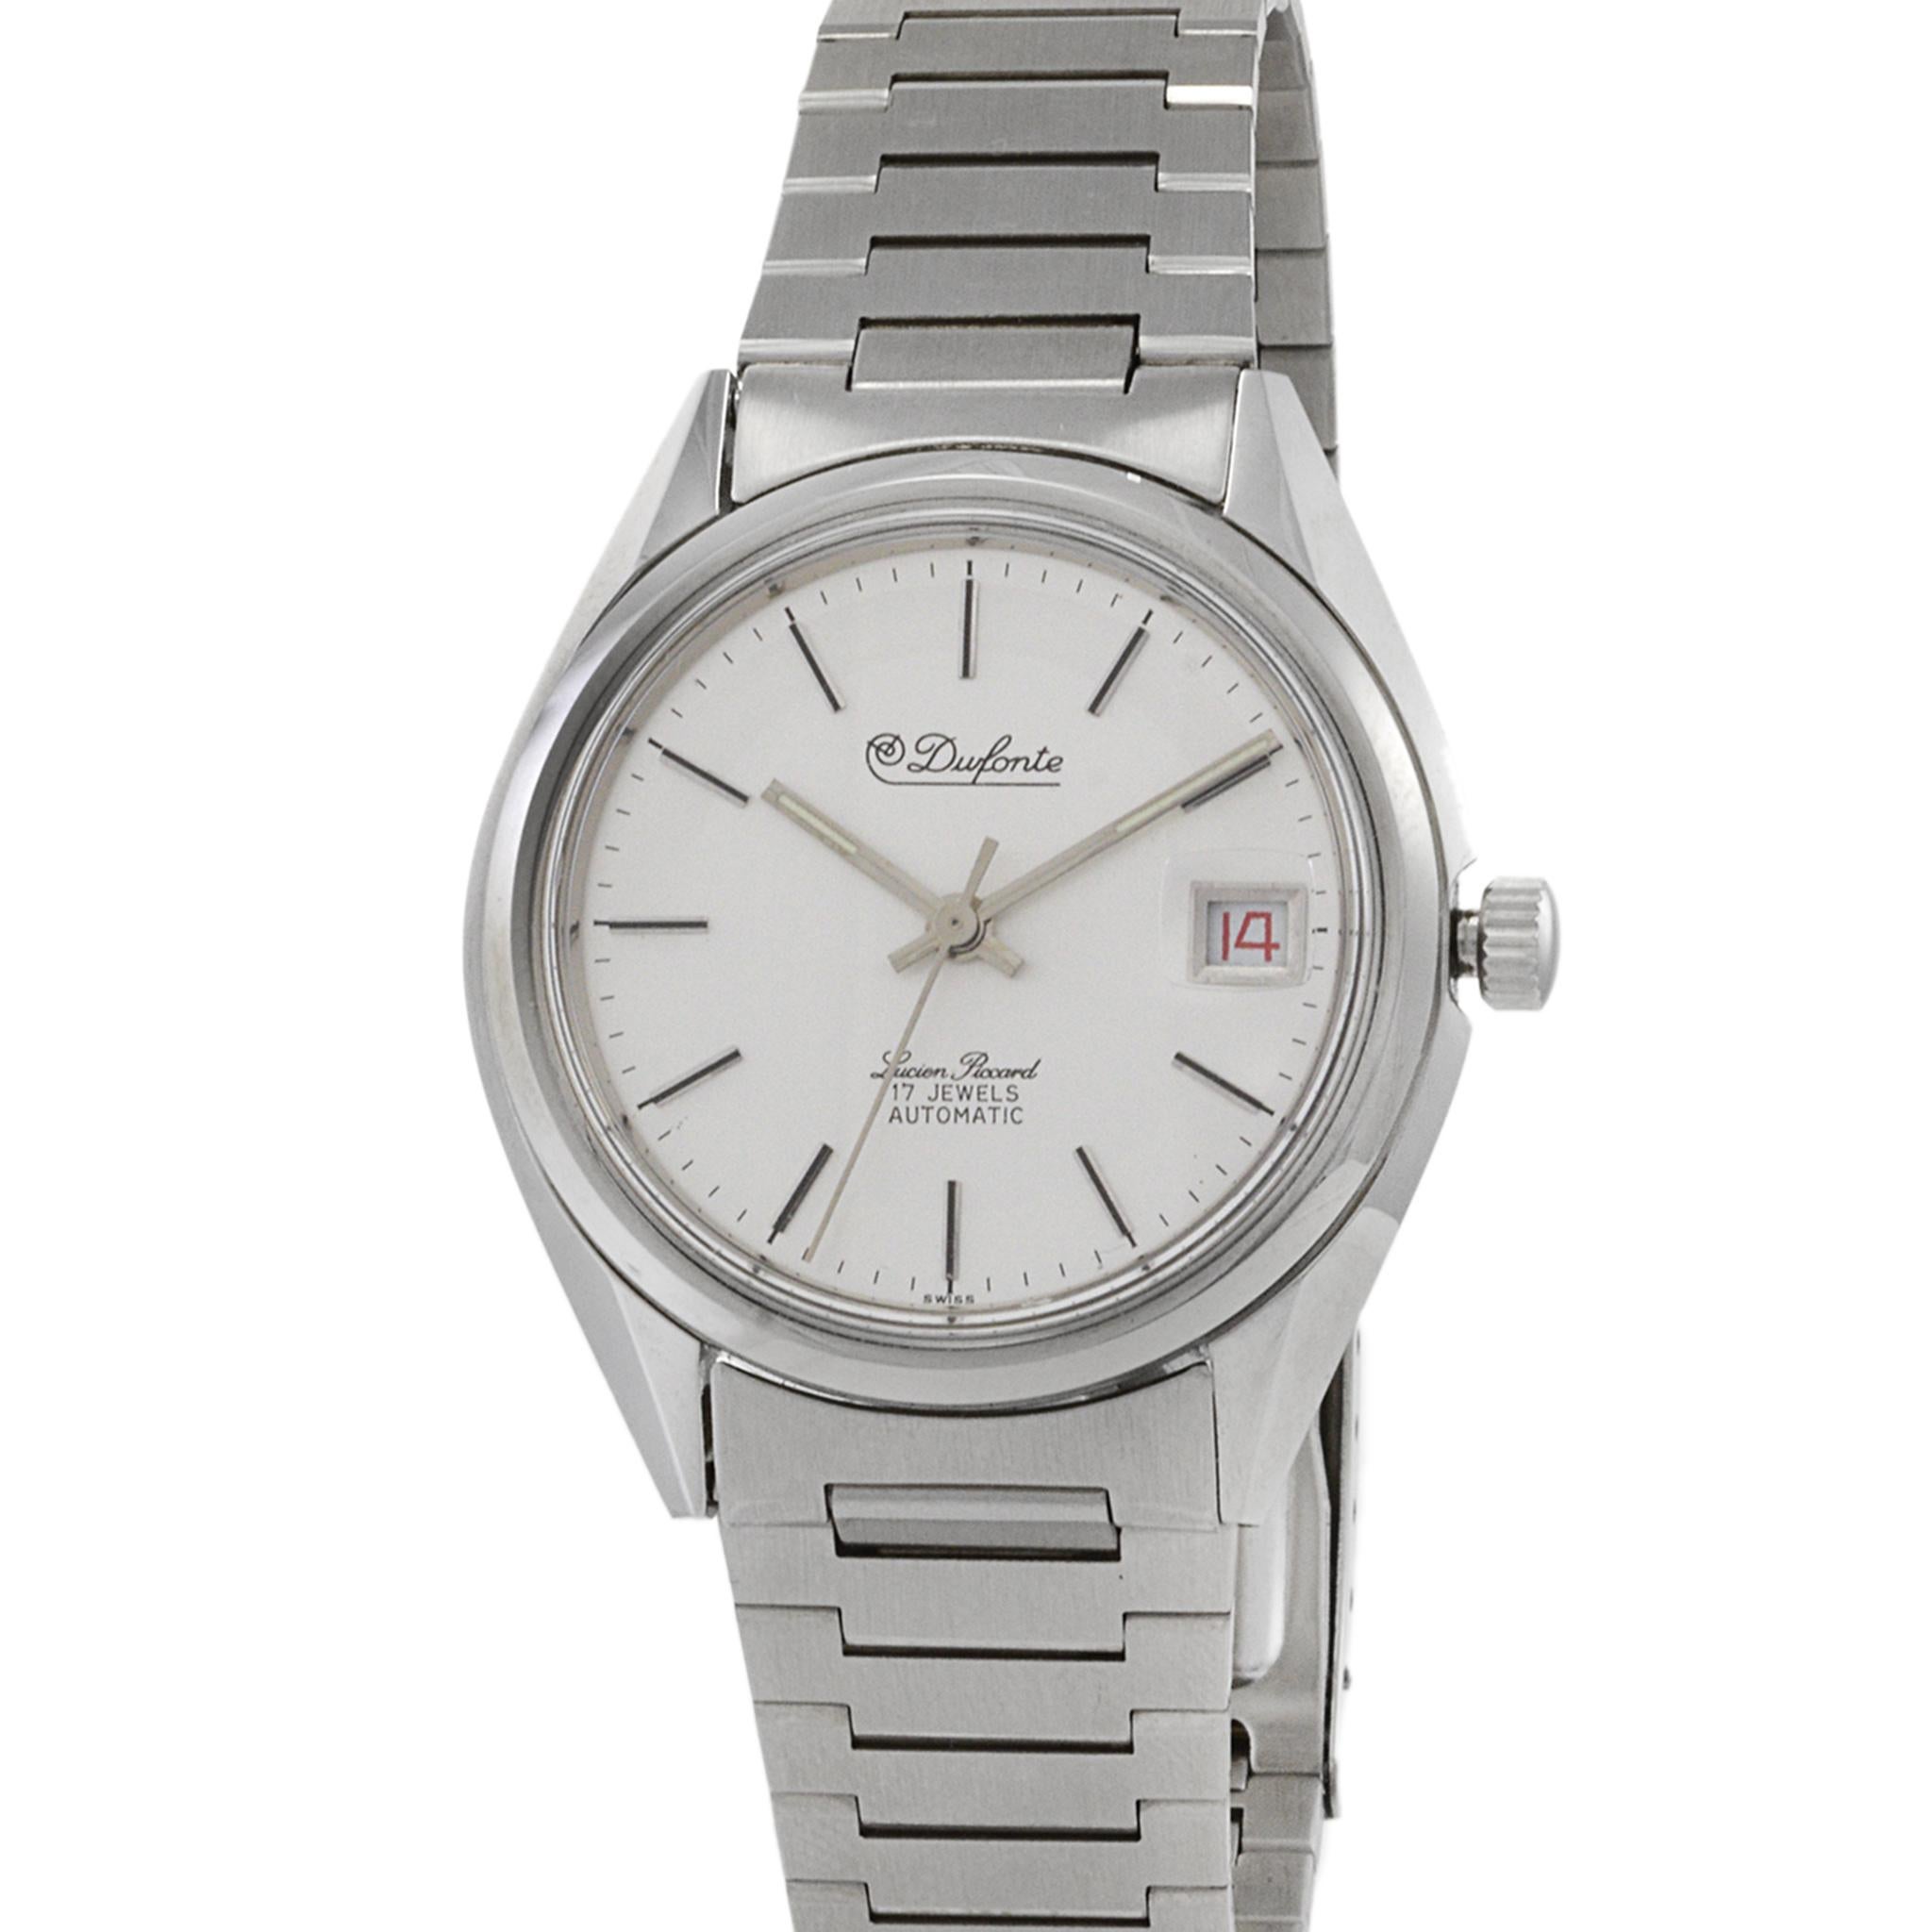 Retro Lucien Piccard Dufonte Calatrava Watch with Date For Sale